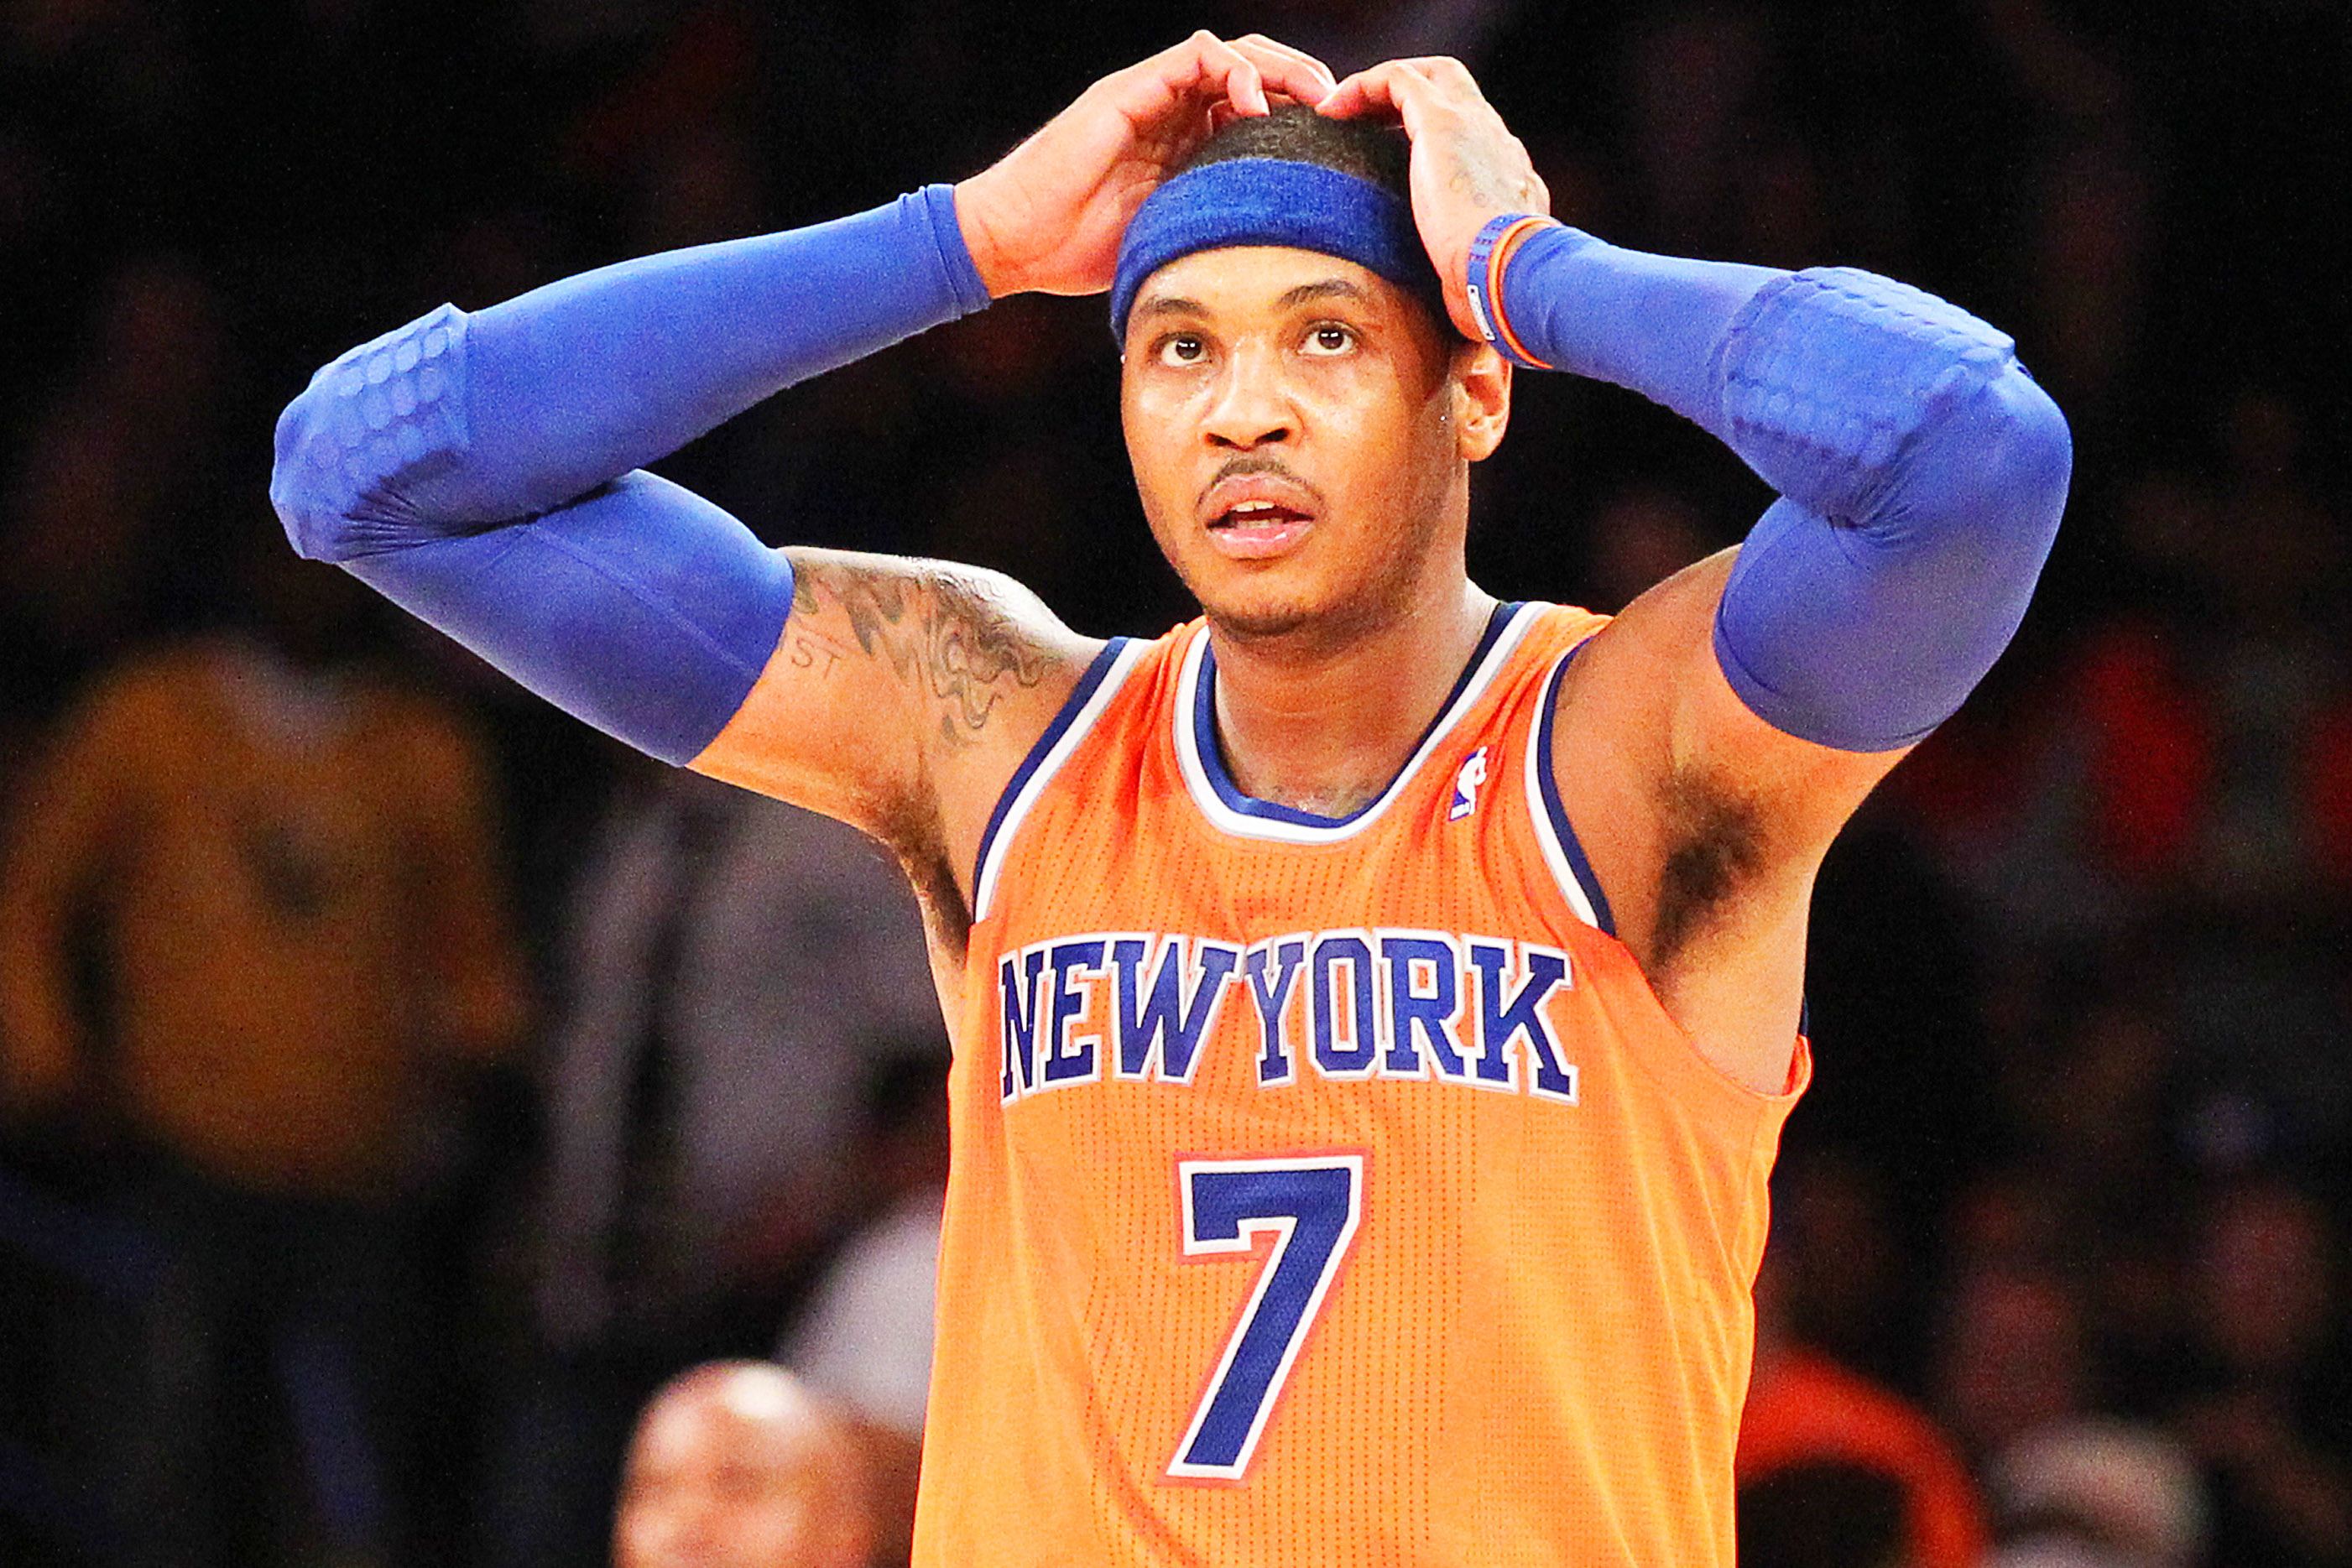 Knicks Look Abysmal, Drop 5th Straight Game In Embarrassing Fashion